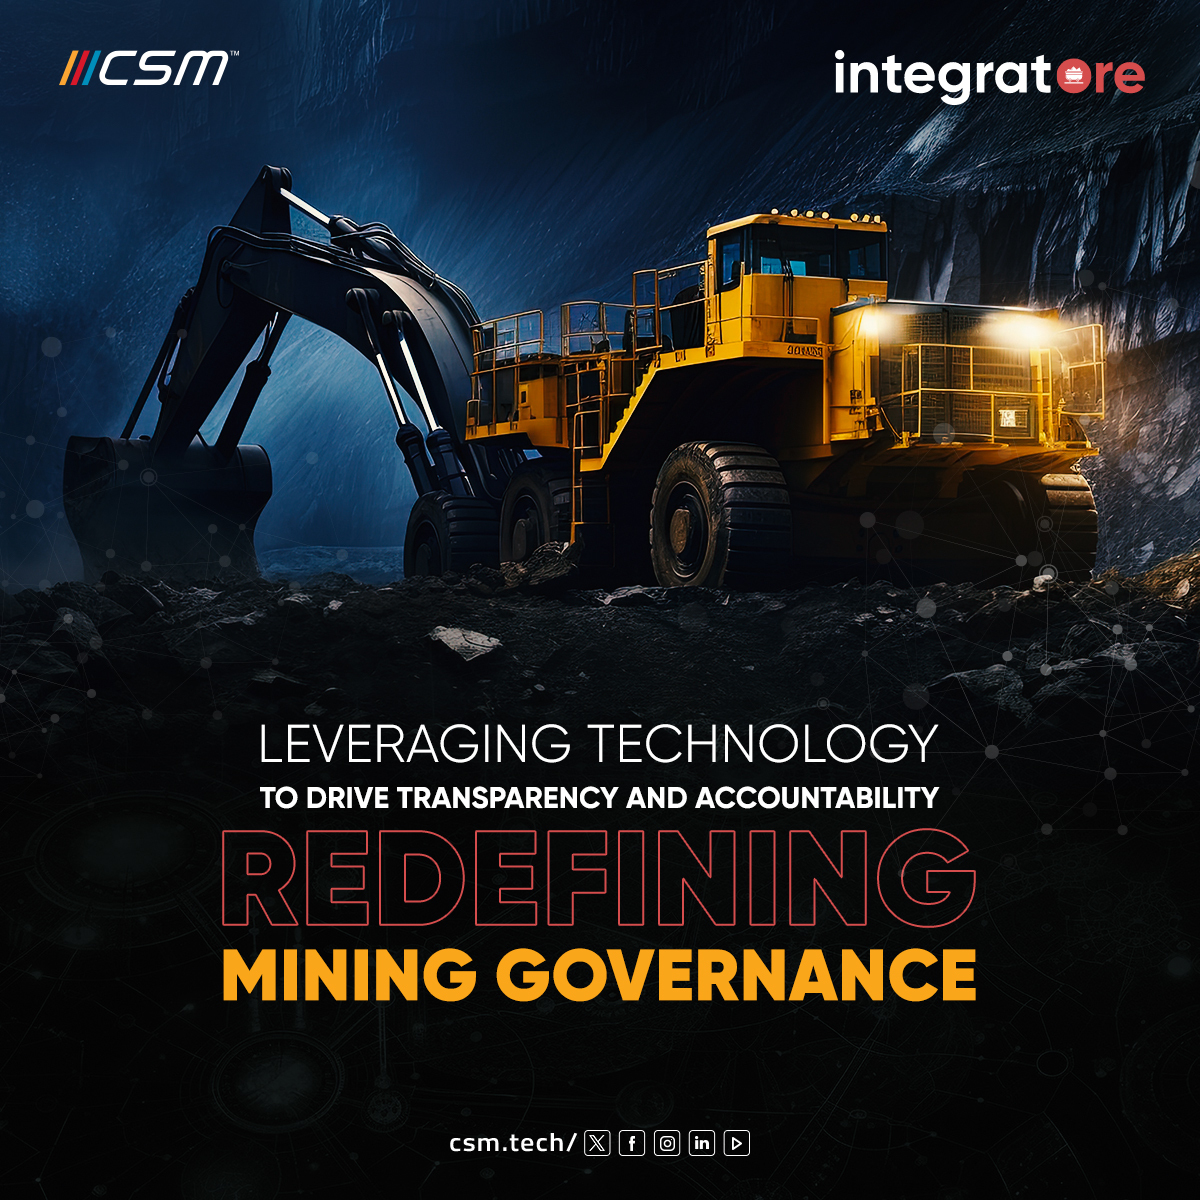 Transforming mining governance for a brighter tomorrow. 👉Learn More: bit.ly/3y6bDiv #CSMTech #Mining #SustainableMining #MiningTechnology #GovTech